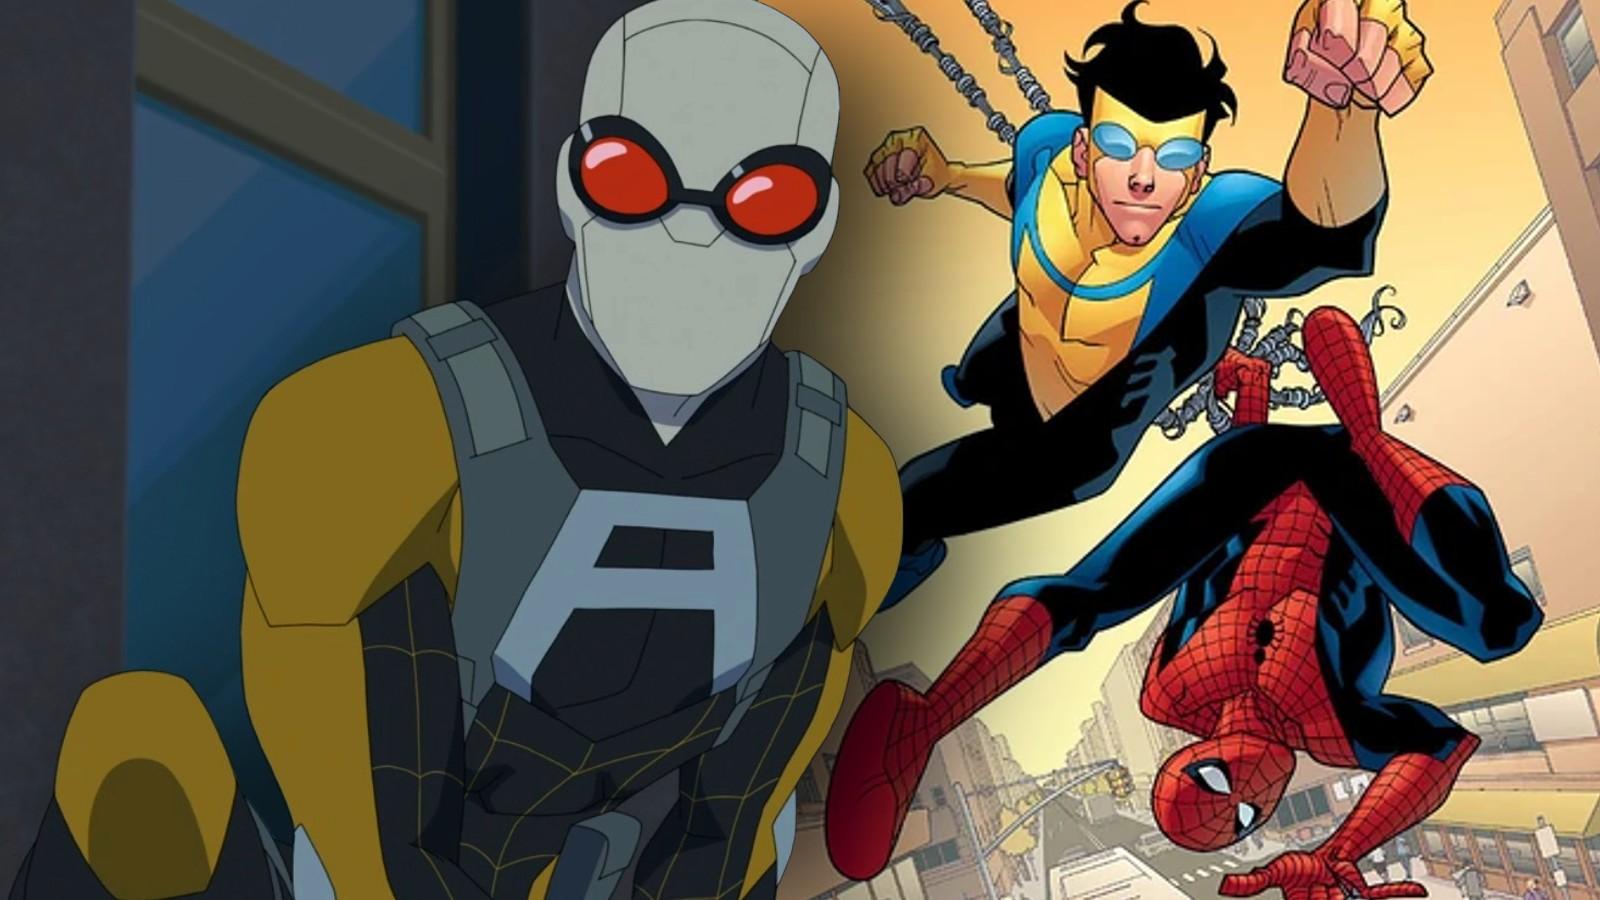 Josh Keaton's Agent Spider in the Invincible Season 2 finale and an image of Invincible and Spider-Man in the comics